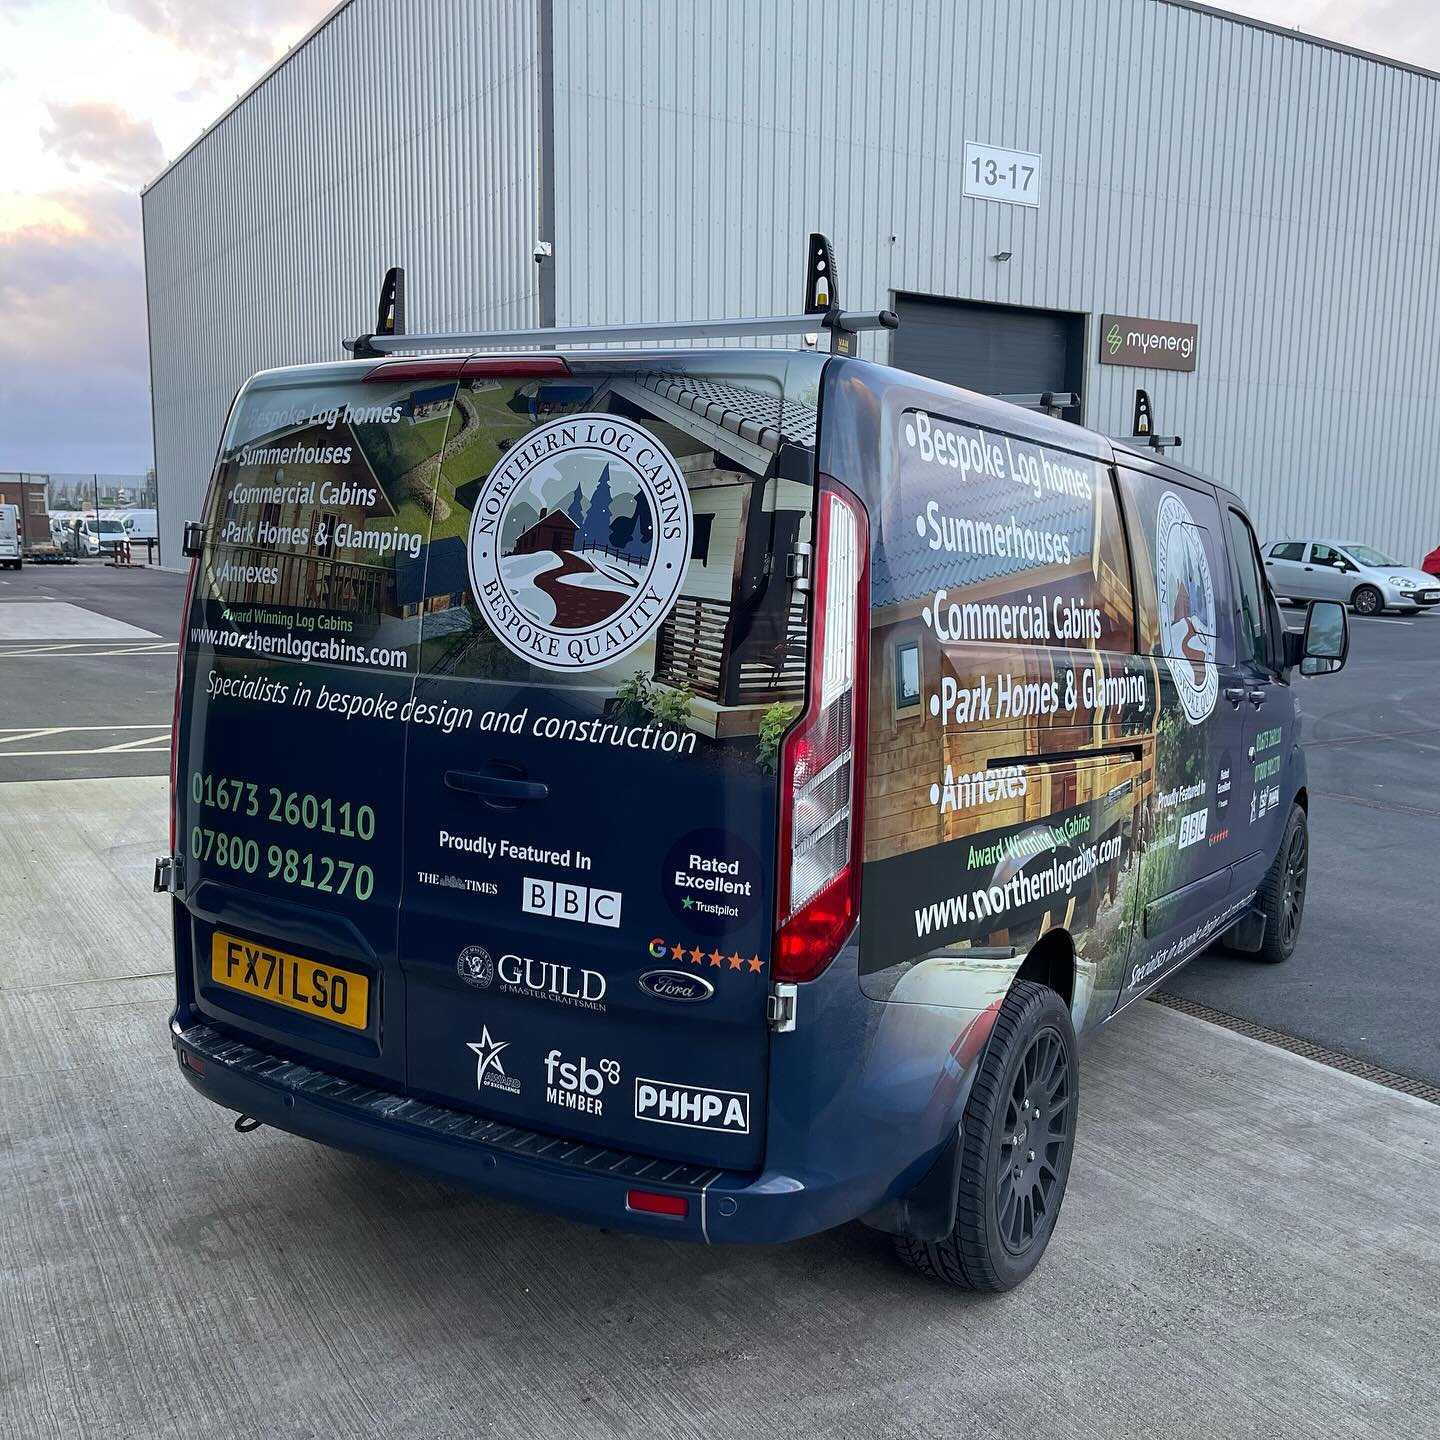 This Transit Custom Has Been Transformed Into A Mobile Ad For @northernlogcabinsltd . We Stripped The Old Signwriting And Gave It A Full Printed Wrap! 

Need A Vehicle Branding? 

Get In Touch And Let Us Transform Your Vehicles. We Can Design And Ins